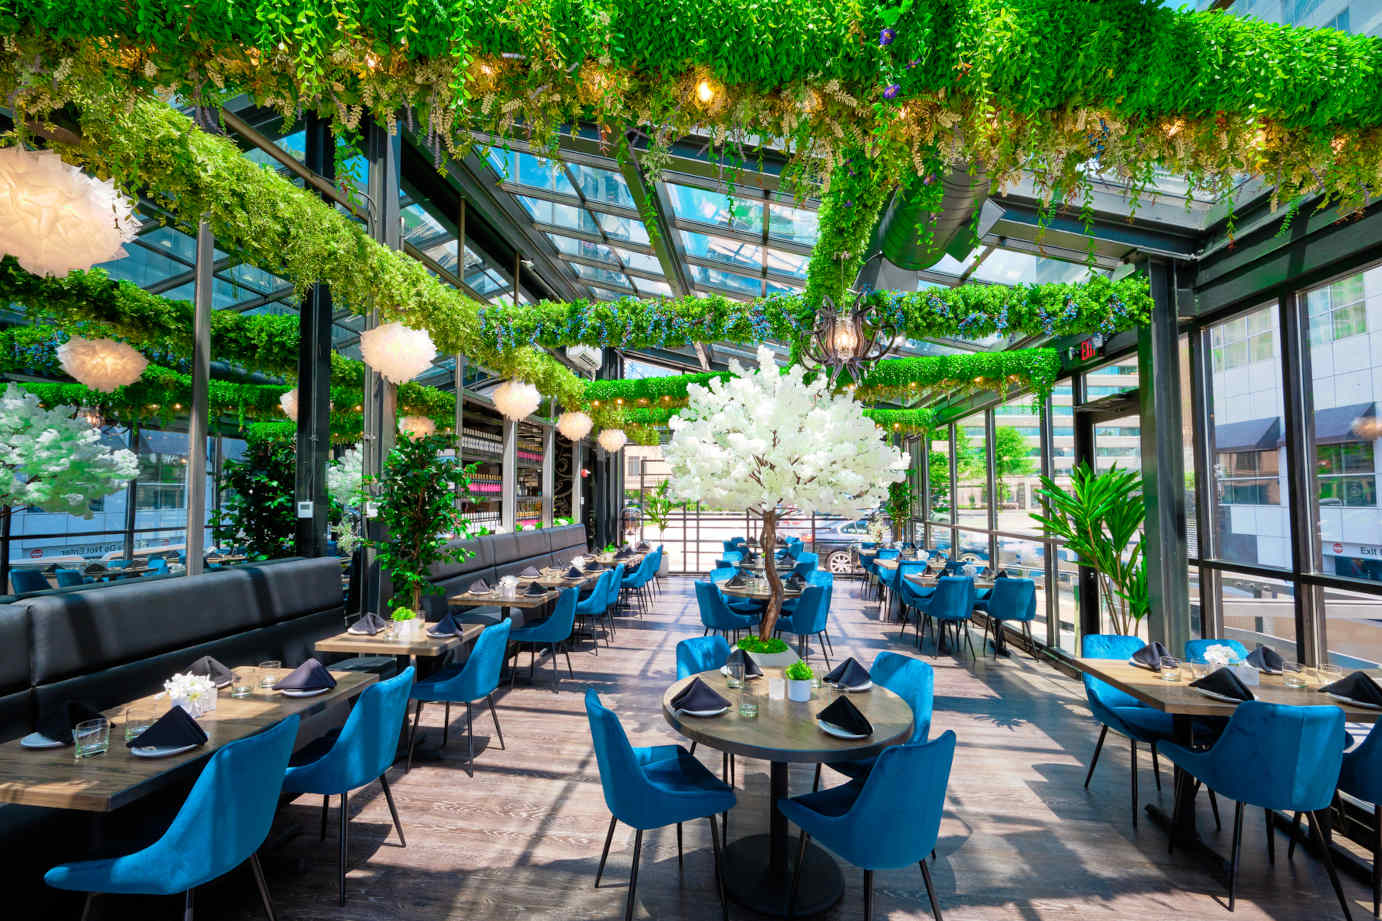 Glass covered patio with greenery decorations, set tables and seating